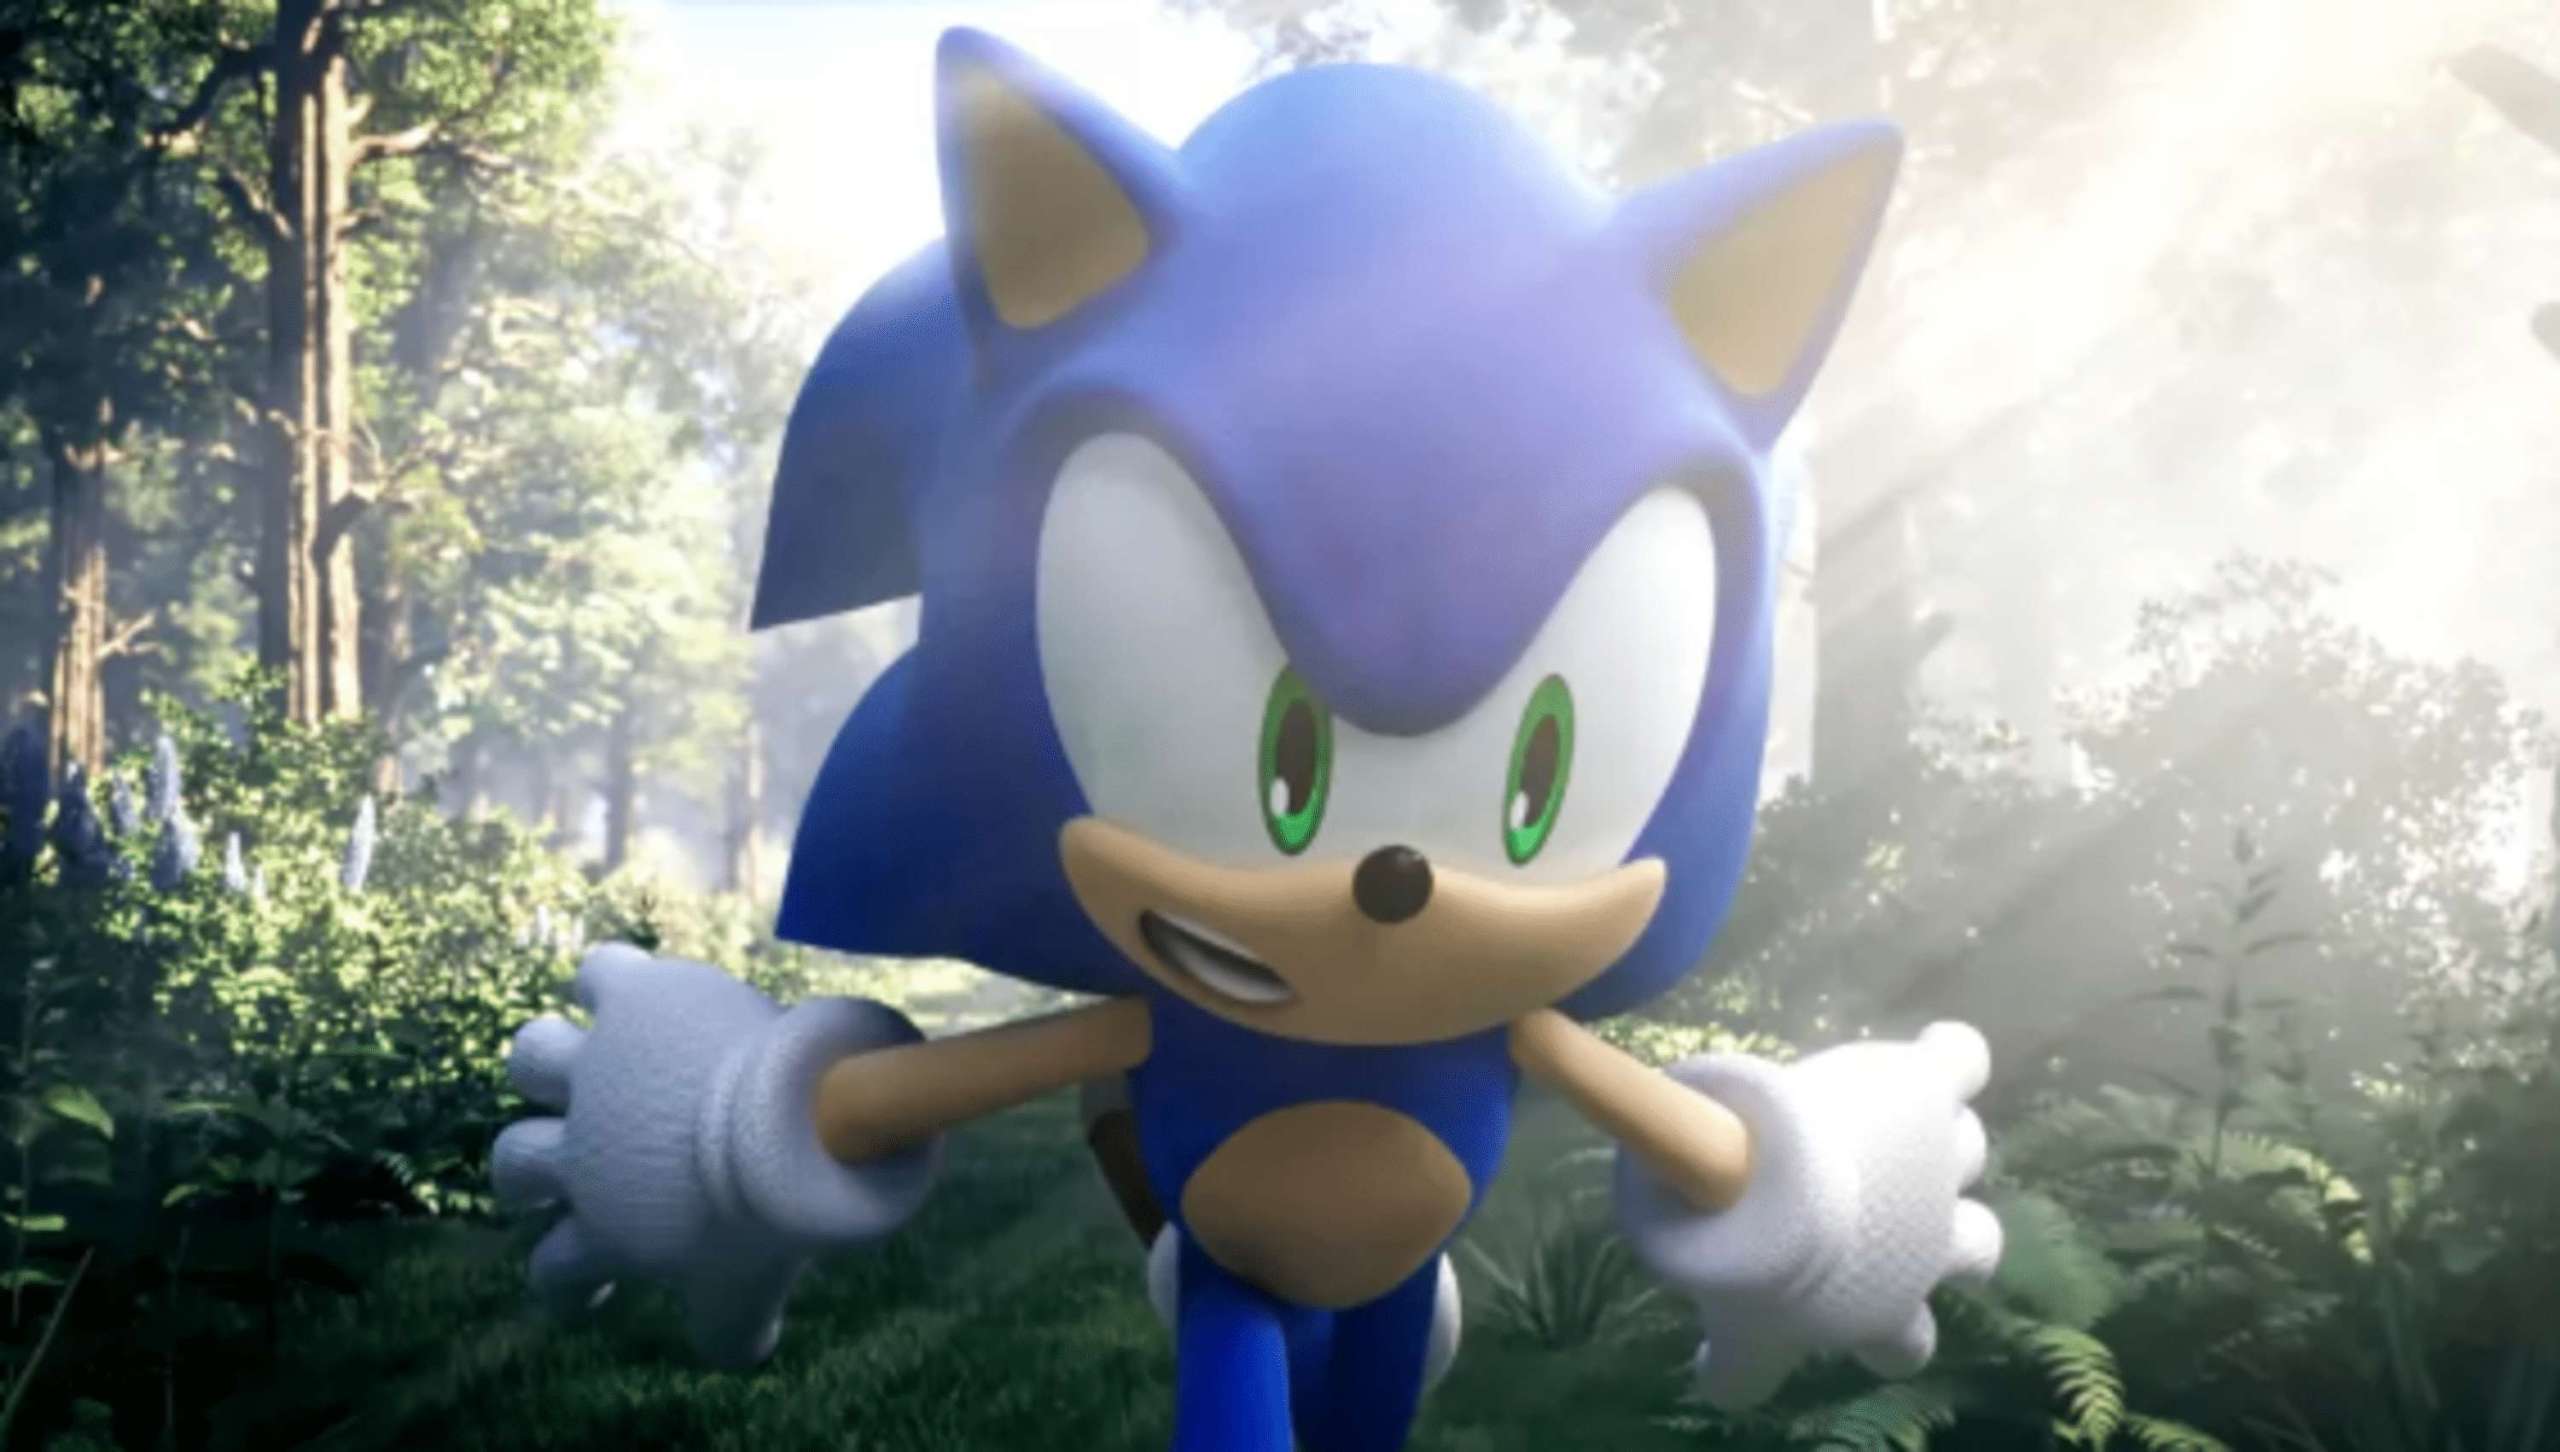 Reaction To Sonic’s Latest Demo Has Been Overwhelmingly Positive